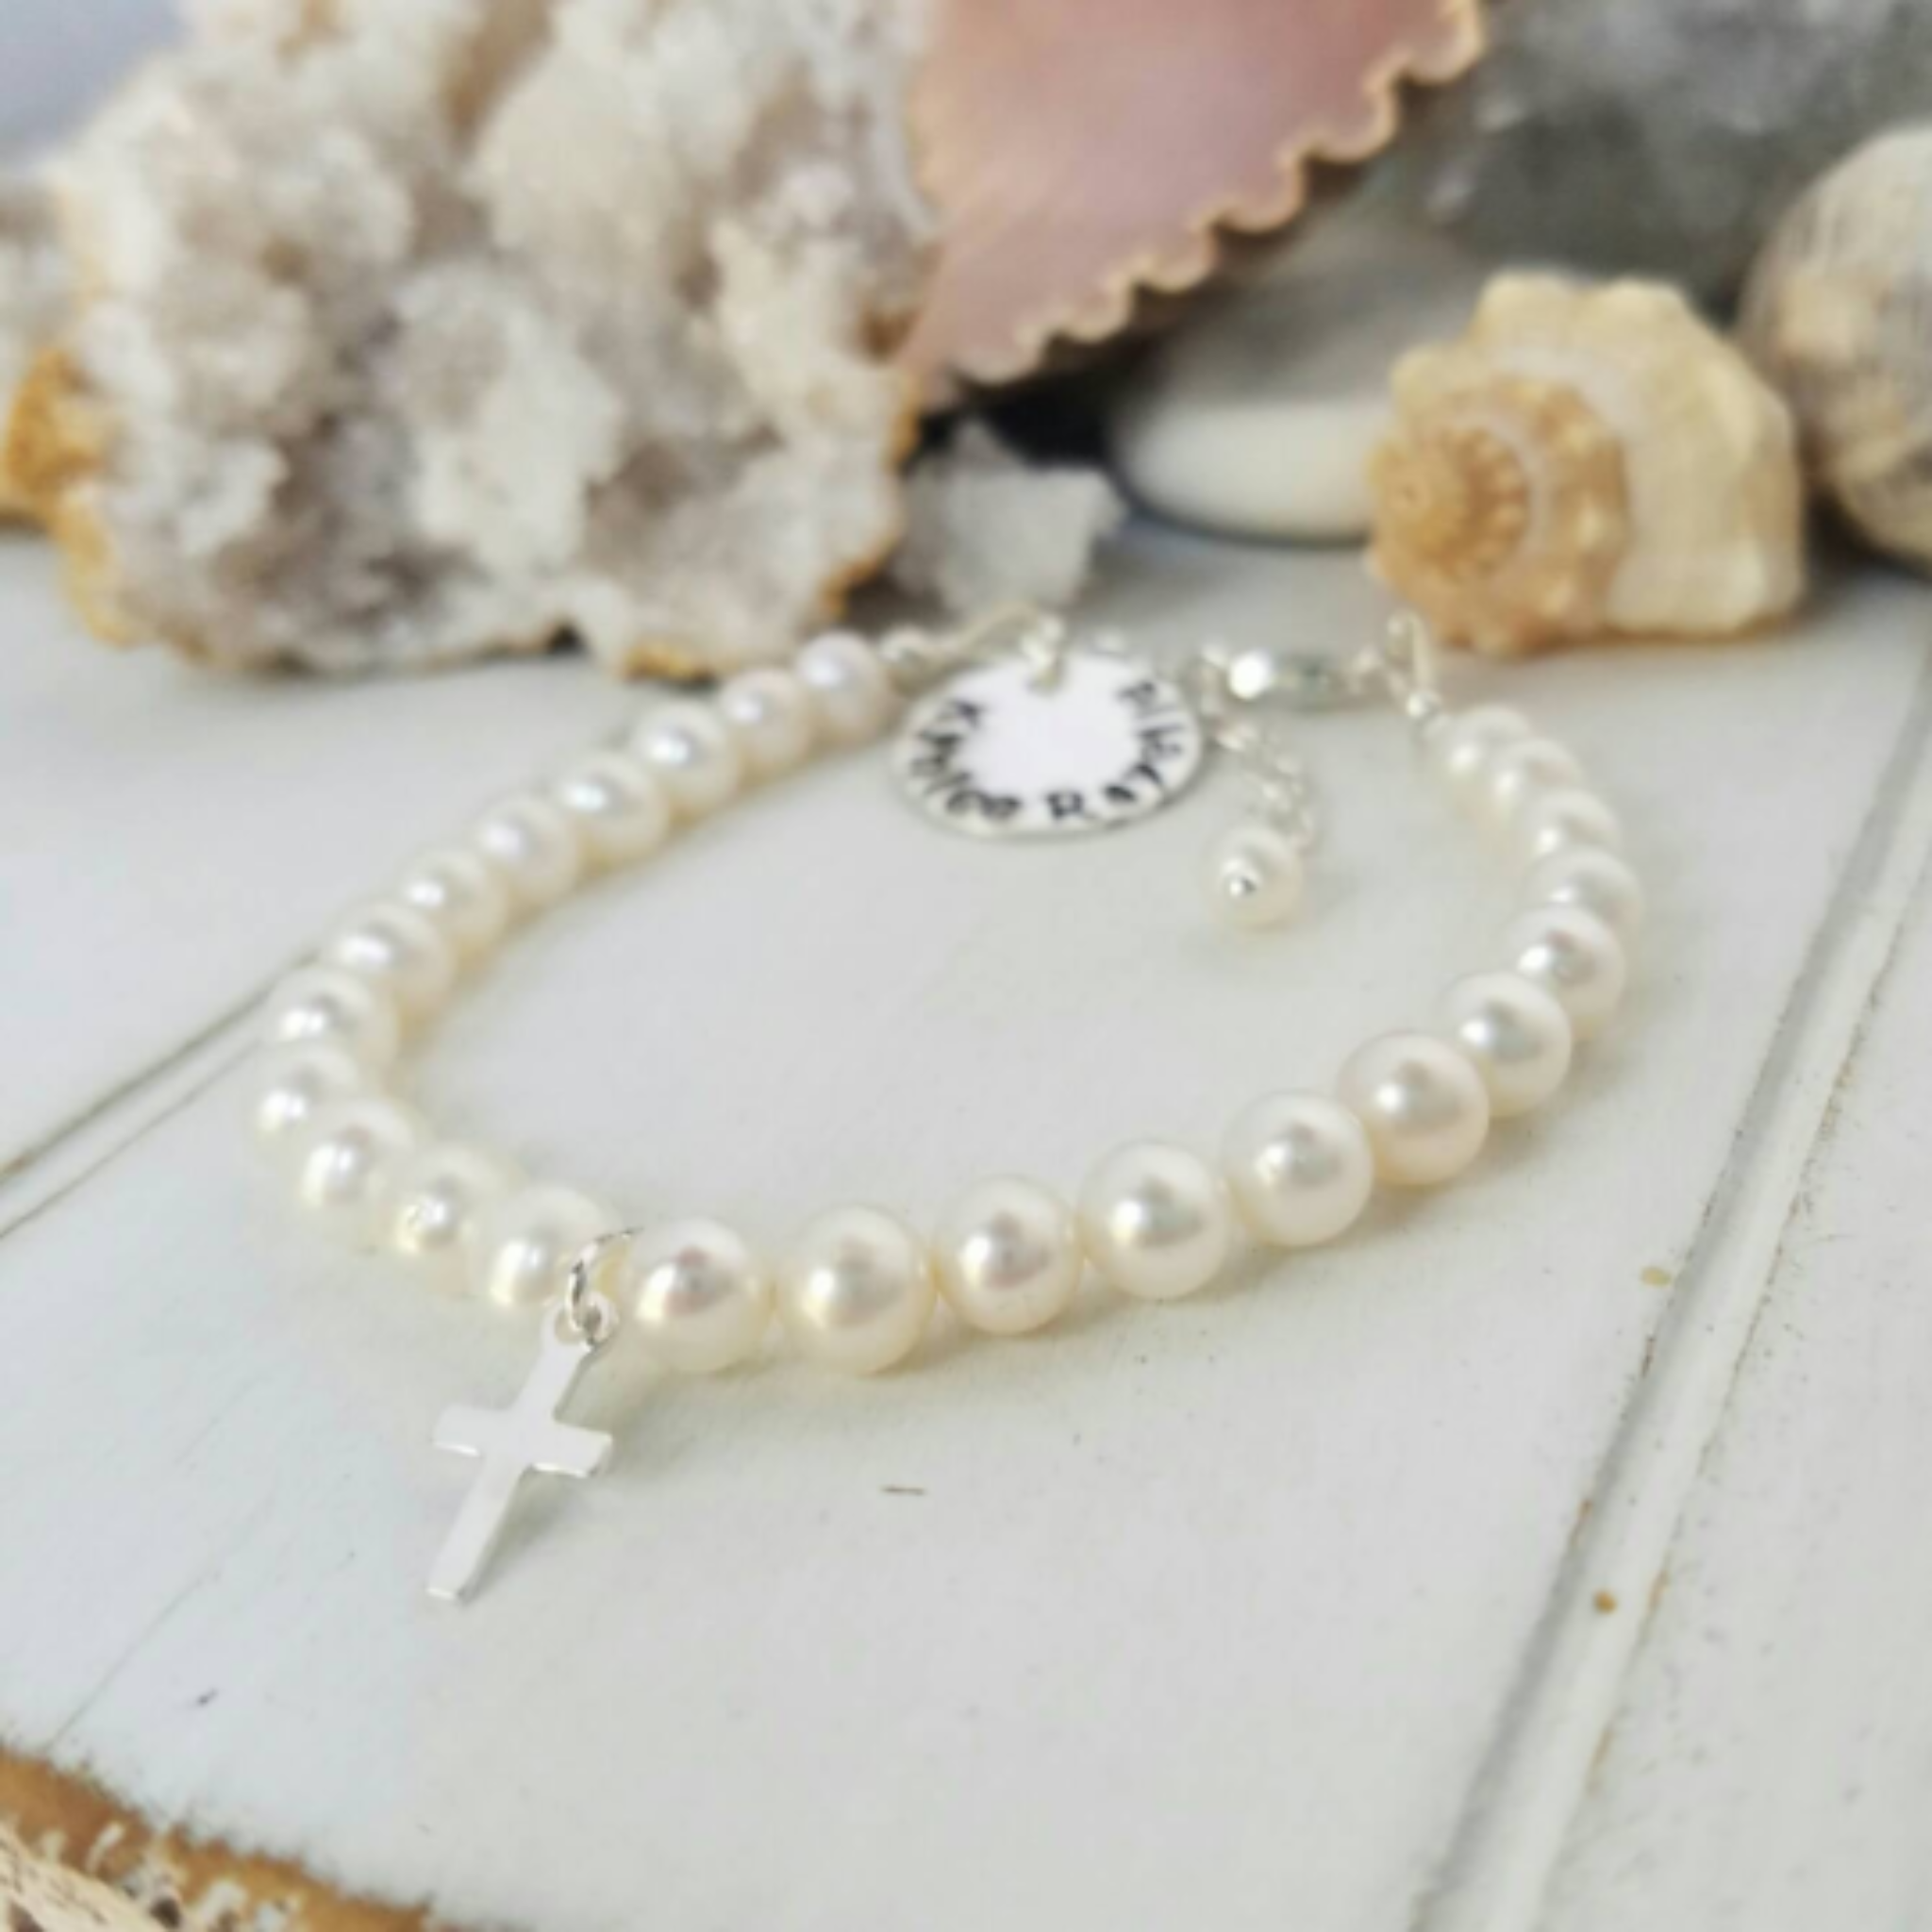 AAA Freshwater Pearl Baby Bracelet with Name Charm - Sterling Silver